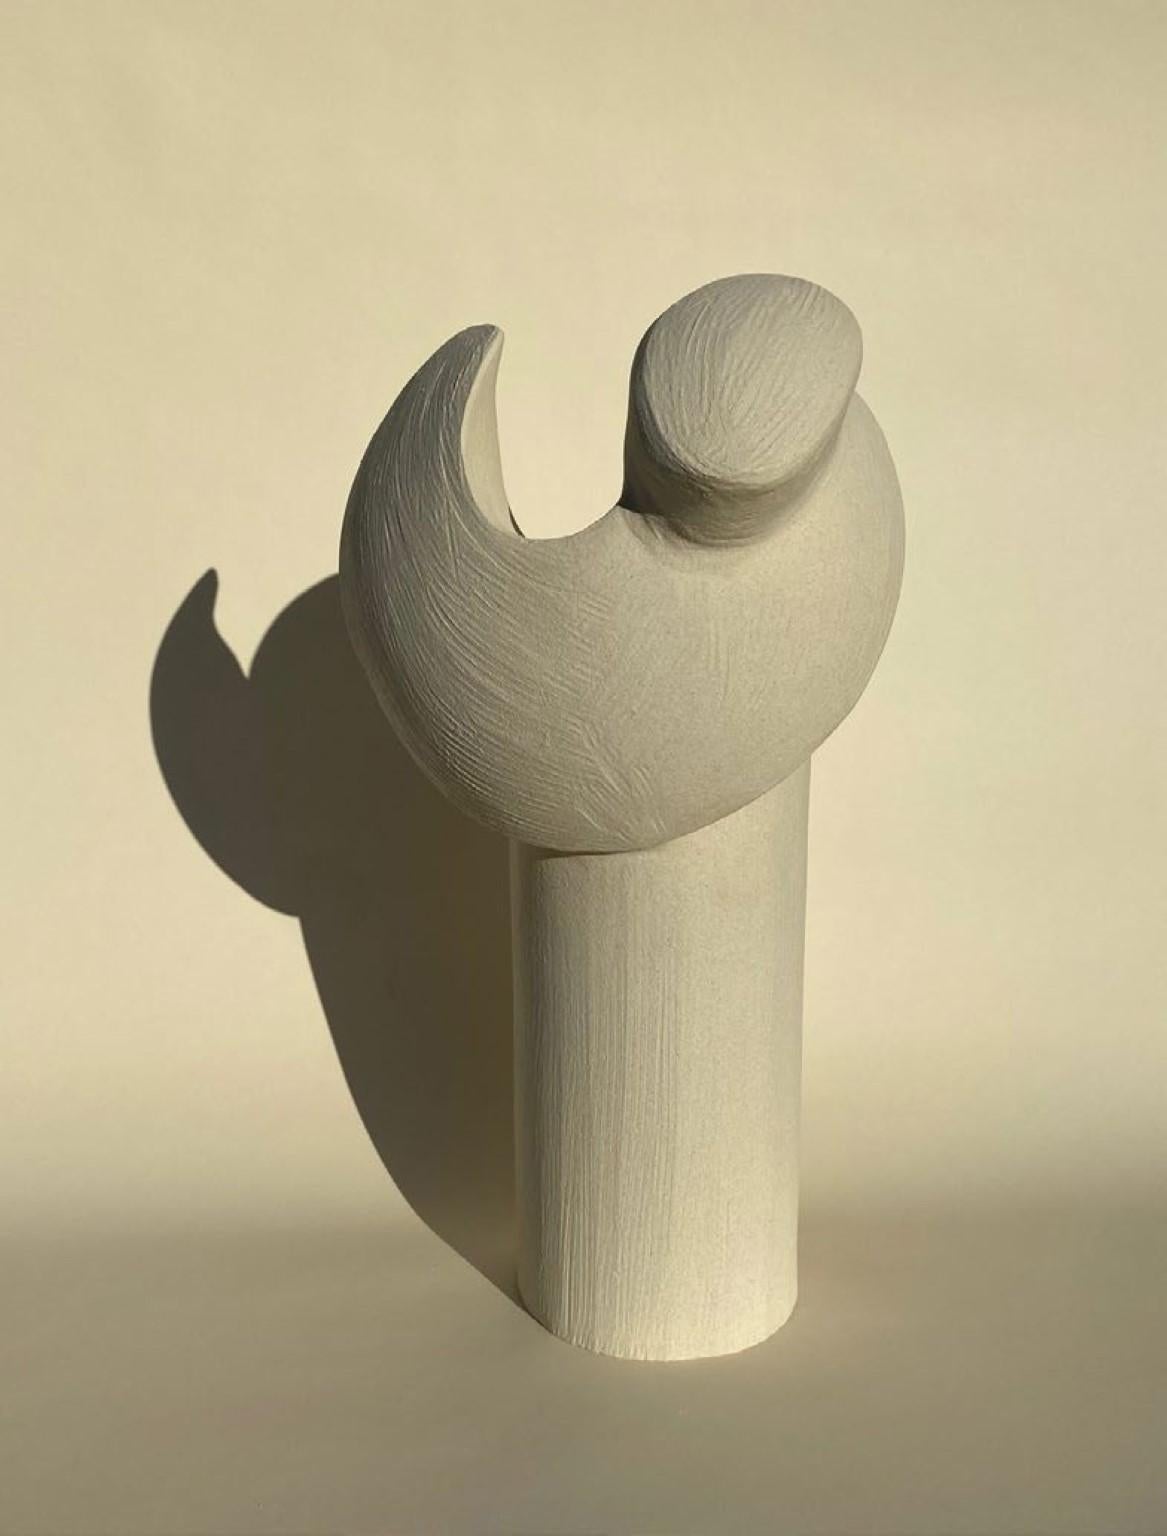 French Medium Le Lud Vase by Olivia Cognet